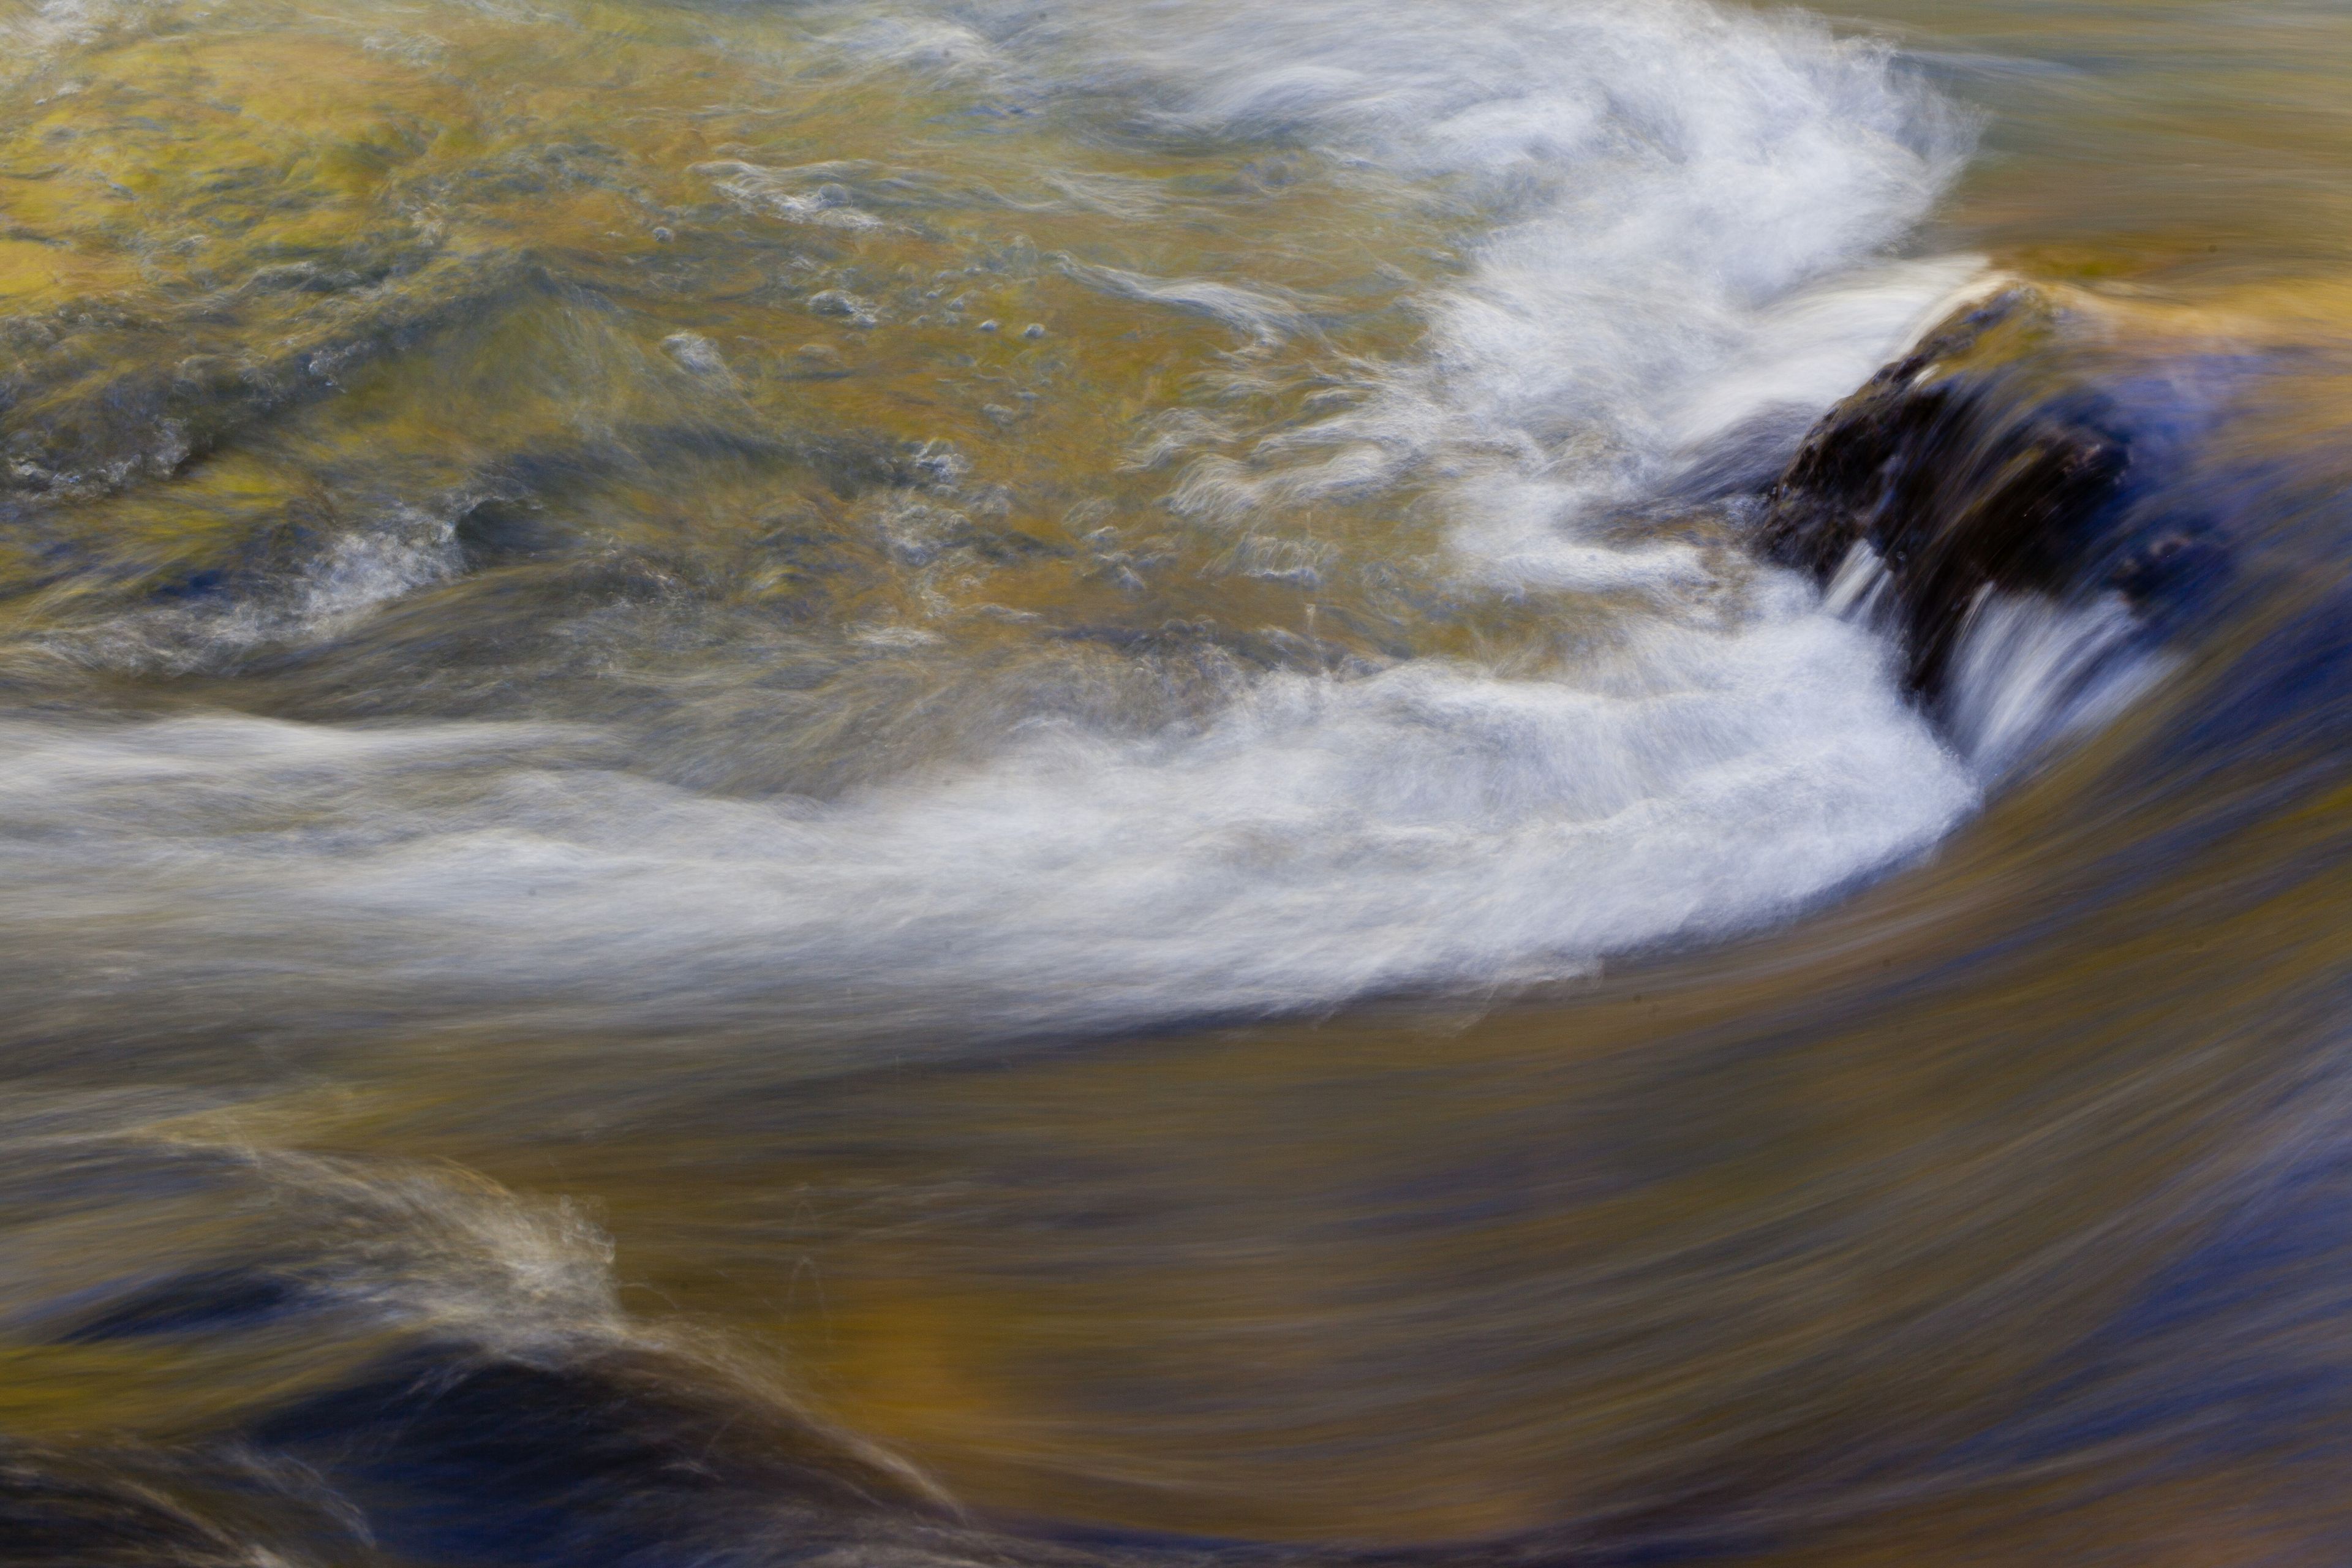 A close-up of waves crashing down in a river.